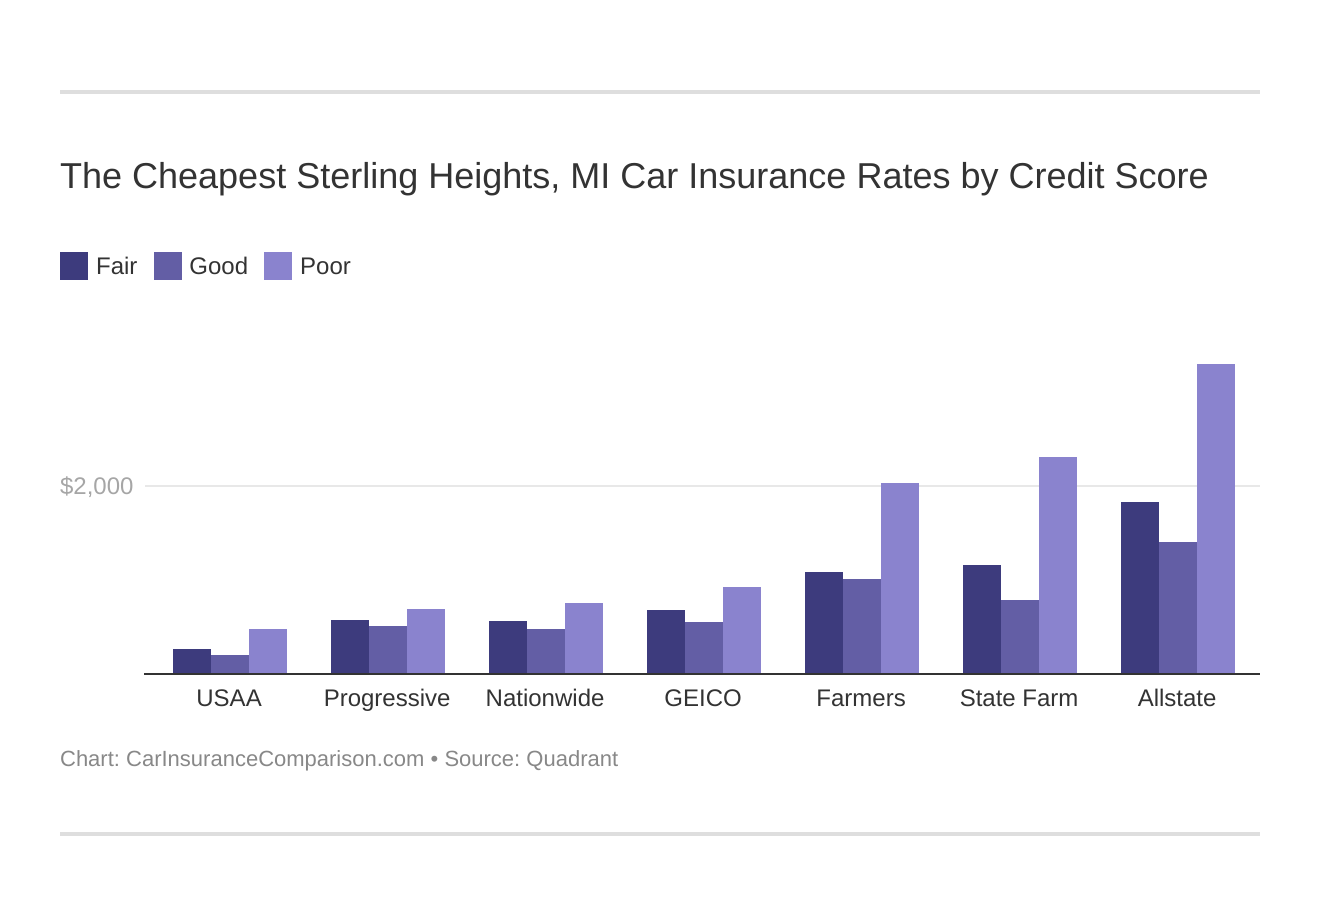 The Cheapest Sterling Heights, MI Car Insurance Rates by Credit Score